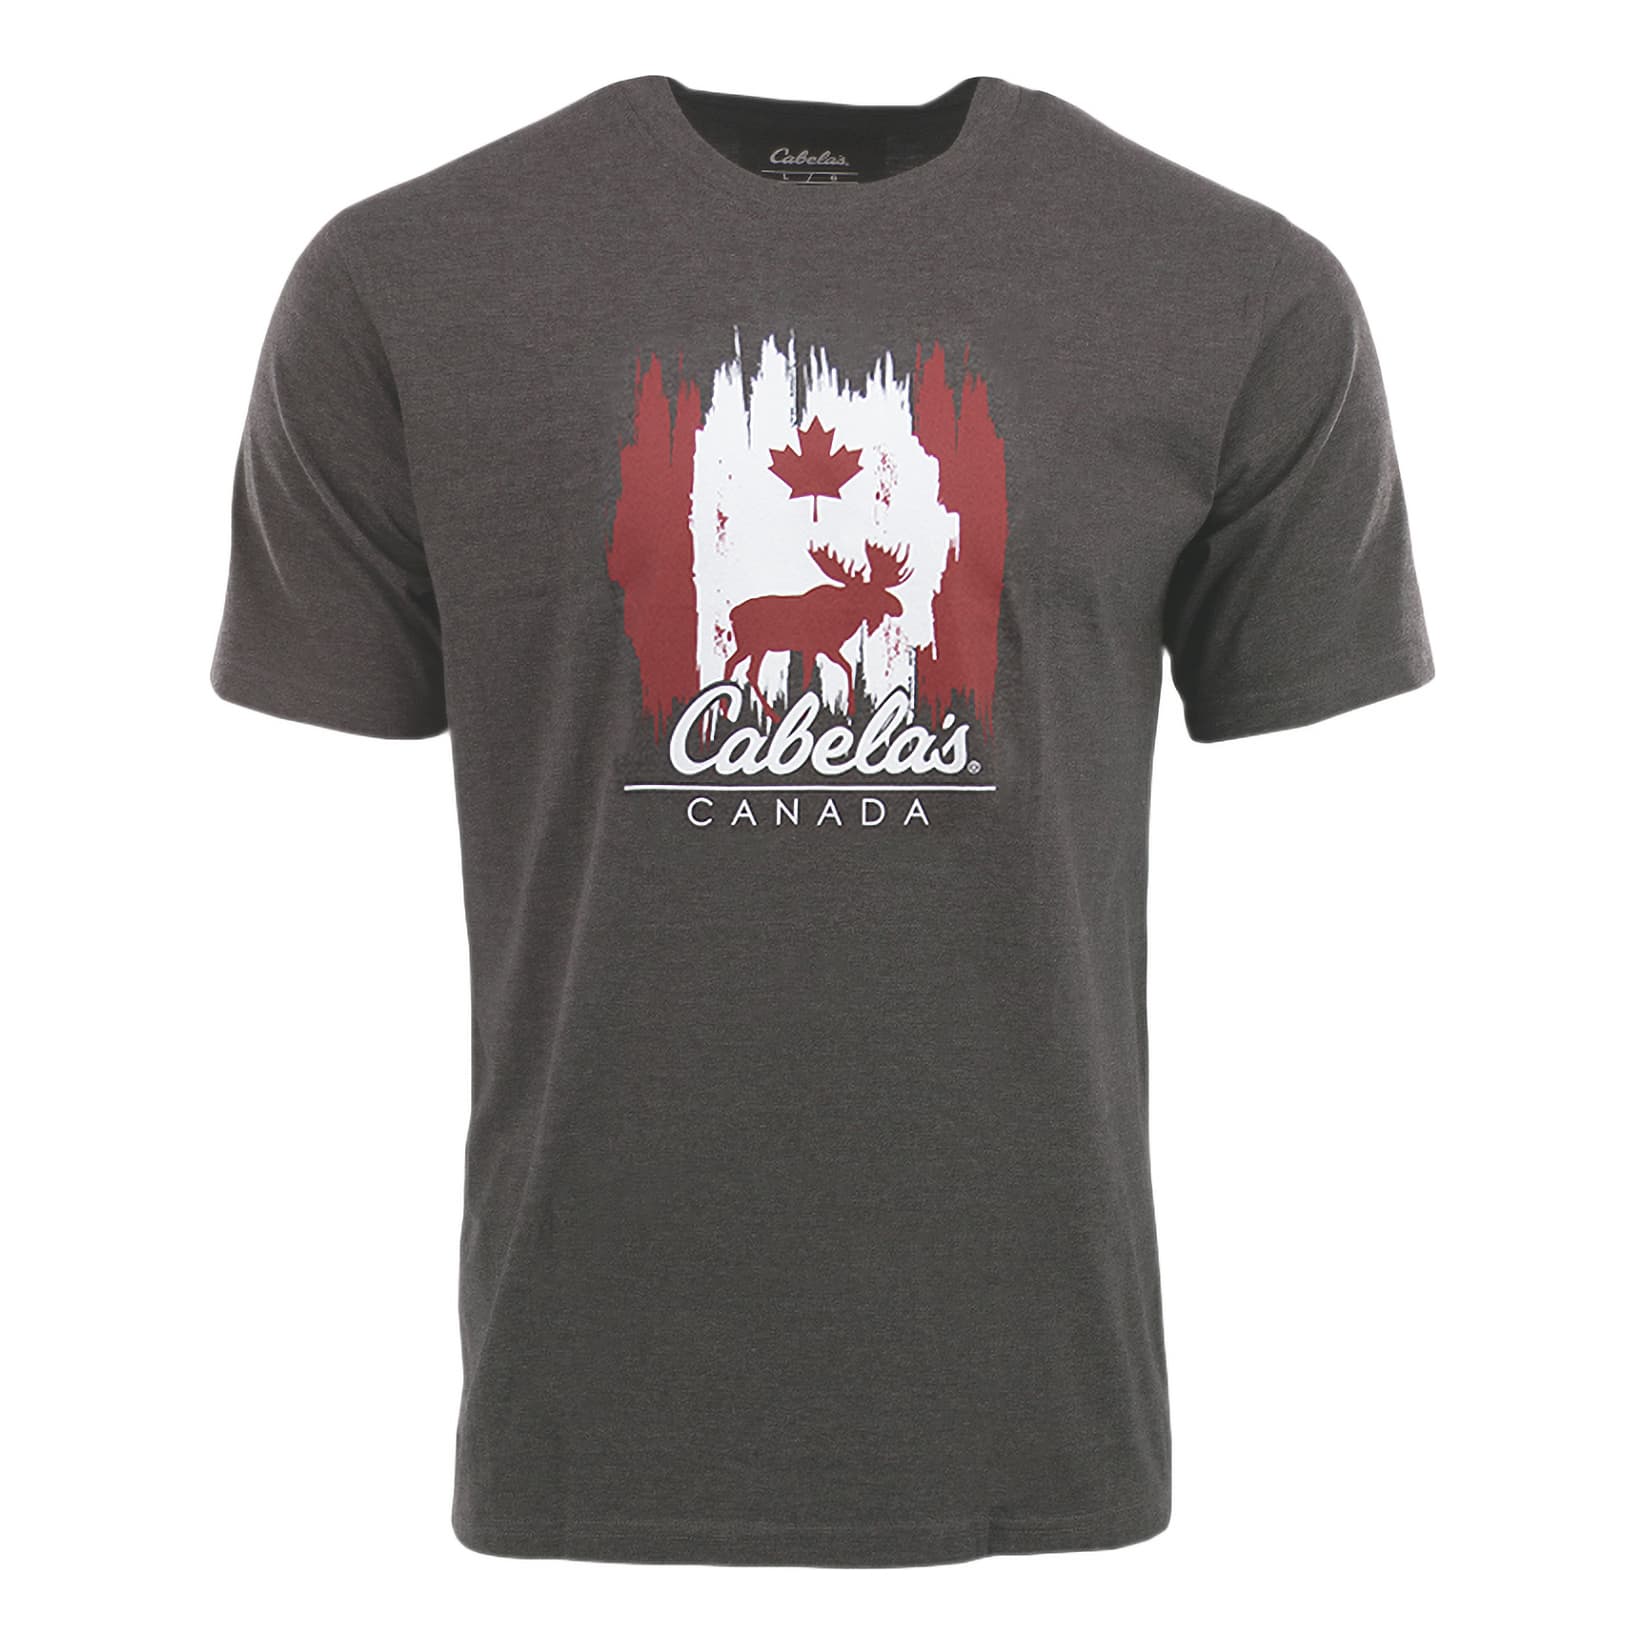 Cabela’s Men’s Canada Day Short-Sleeve T-Shirt - Charcoal Heather